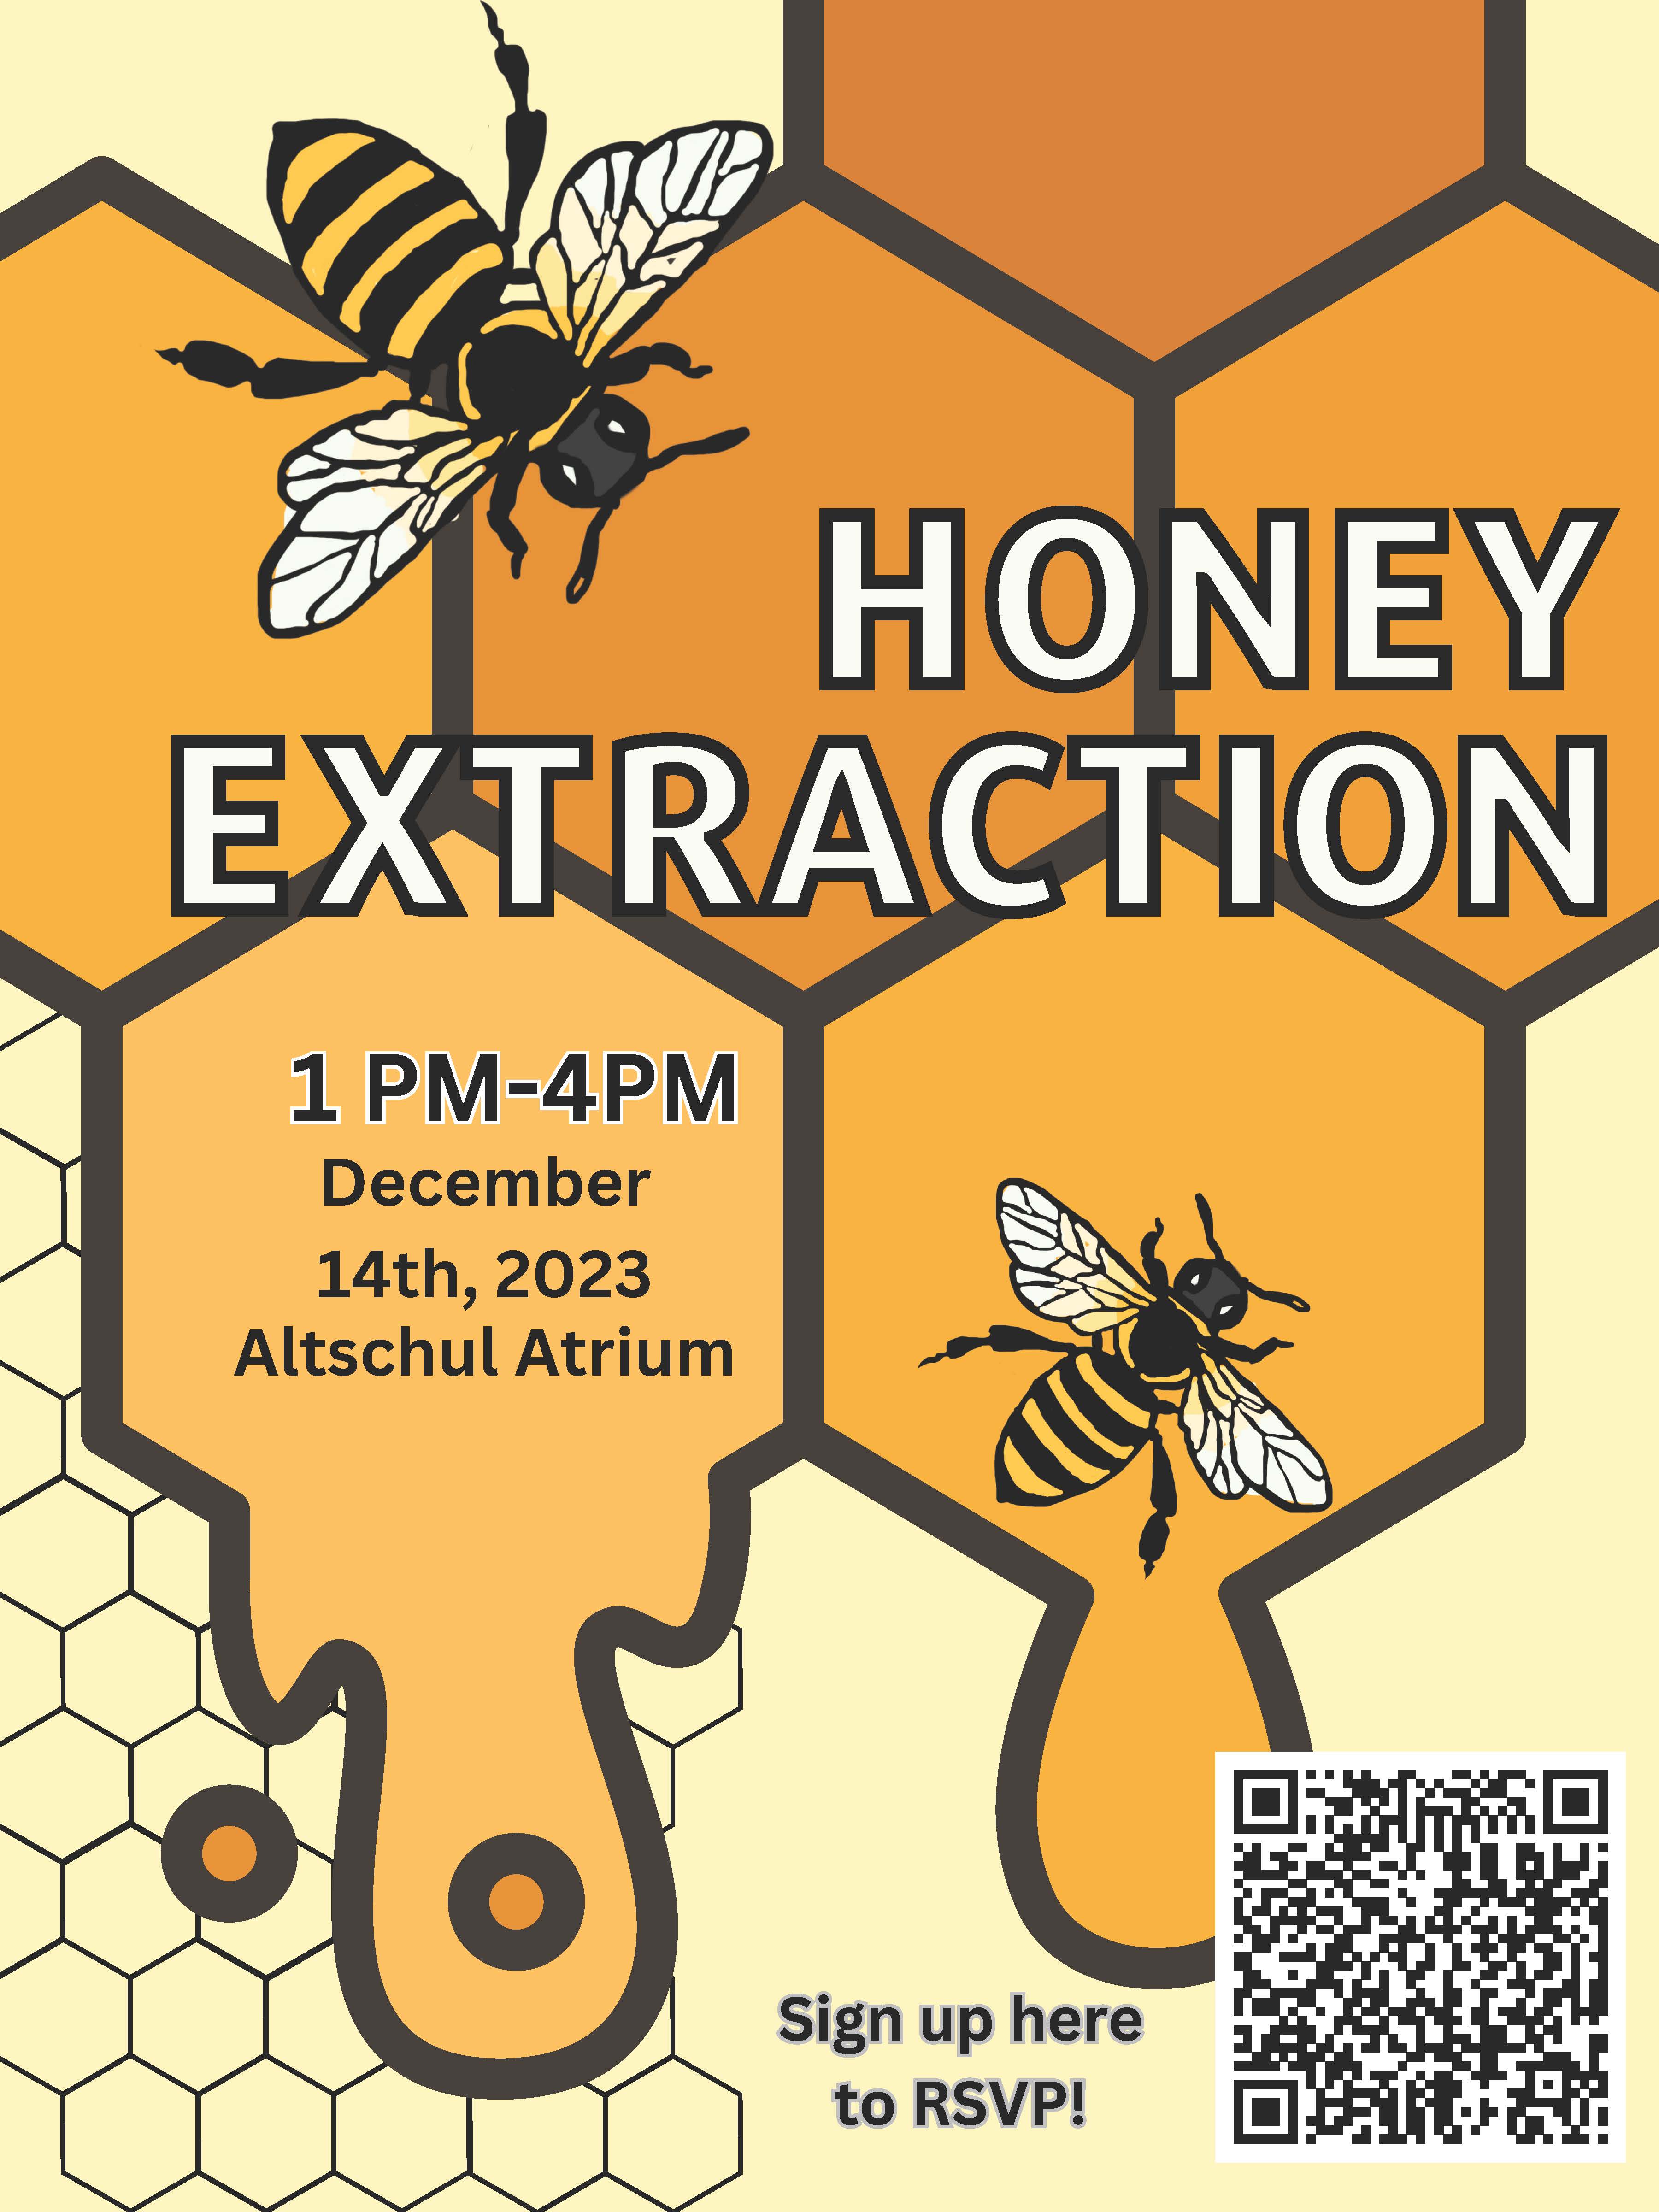 Honey Extraction with the Snow Lab, December 14th from 1 to 4pm in the Altschul Atrium. Please RSVP at https://forms.gle/yjcop4BdCzX7rV1q7